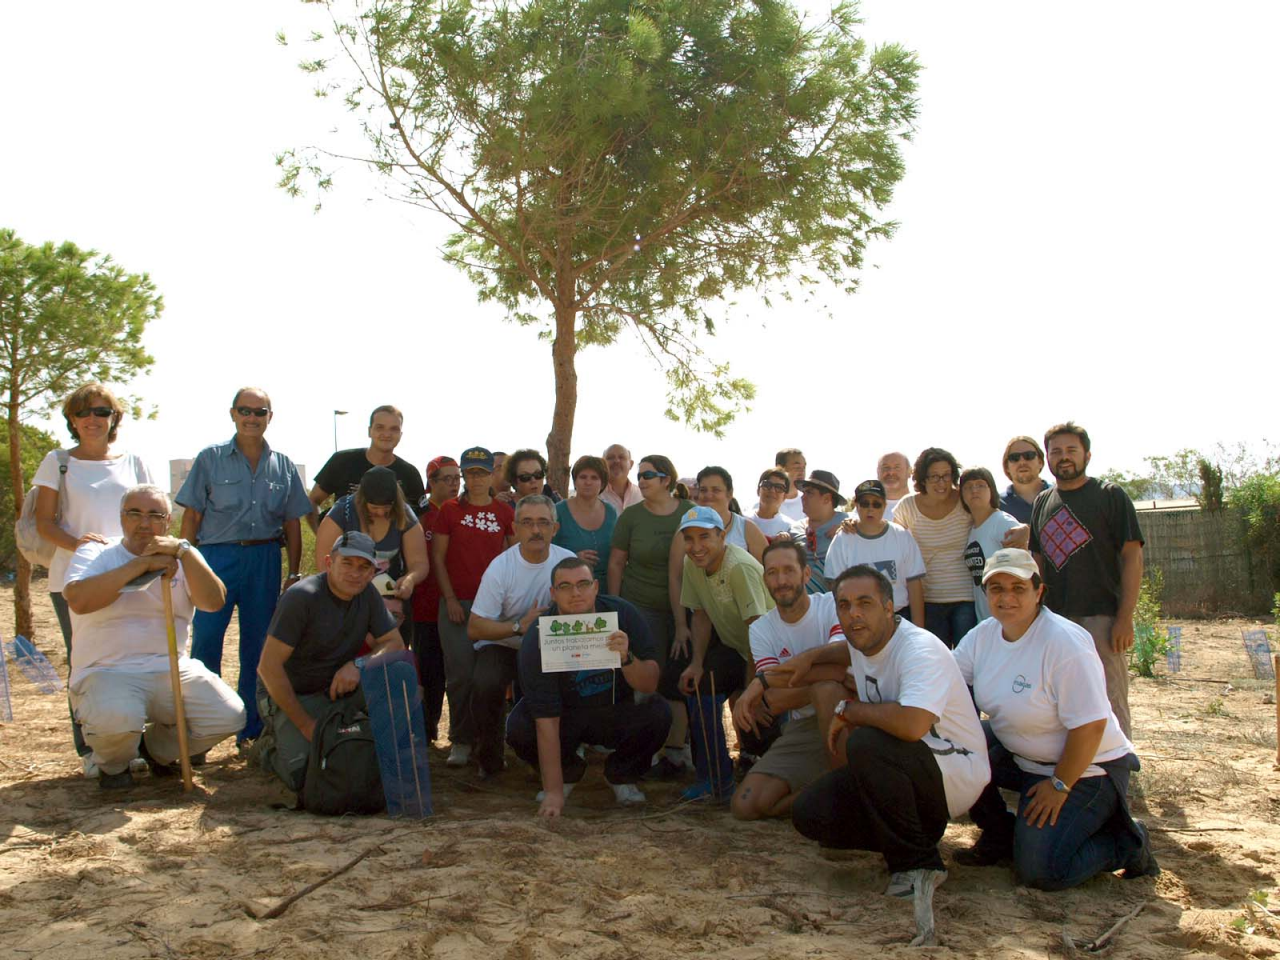  Enagás Professionals of the Cartagena Plant at a reforestation activity, along with a group of people with disabilities